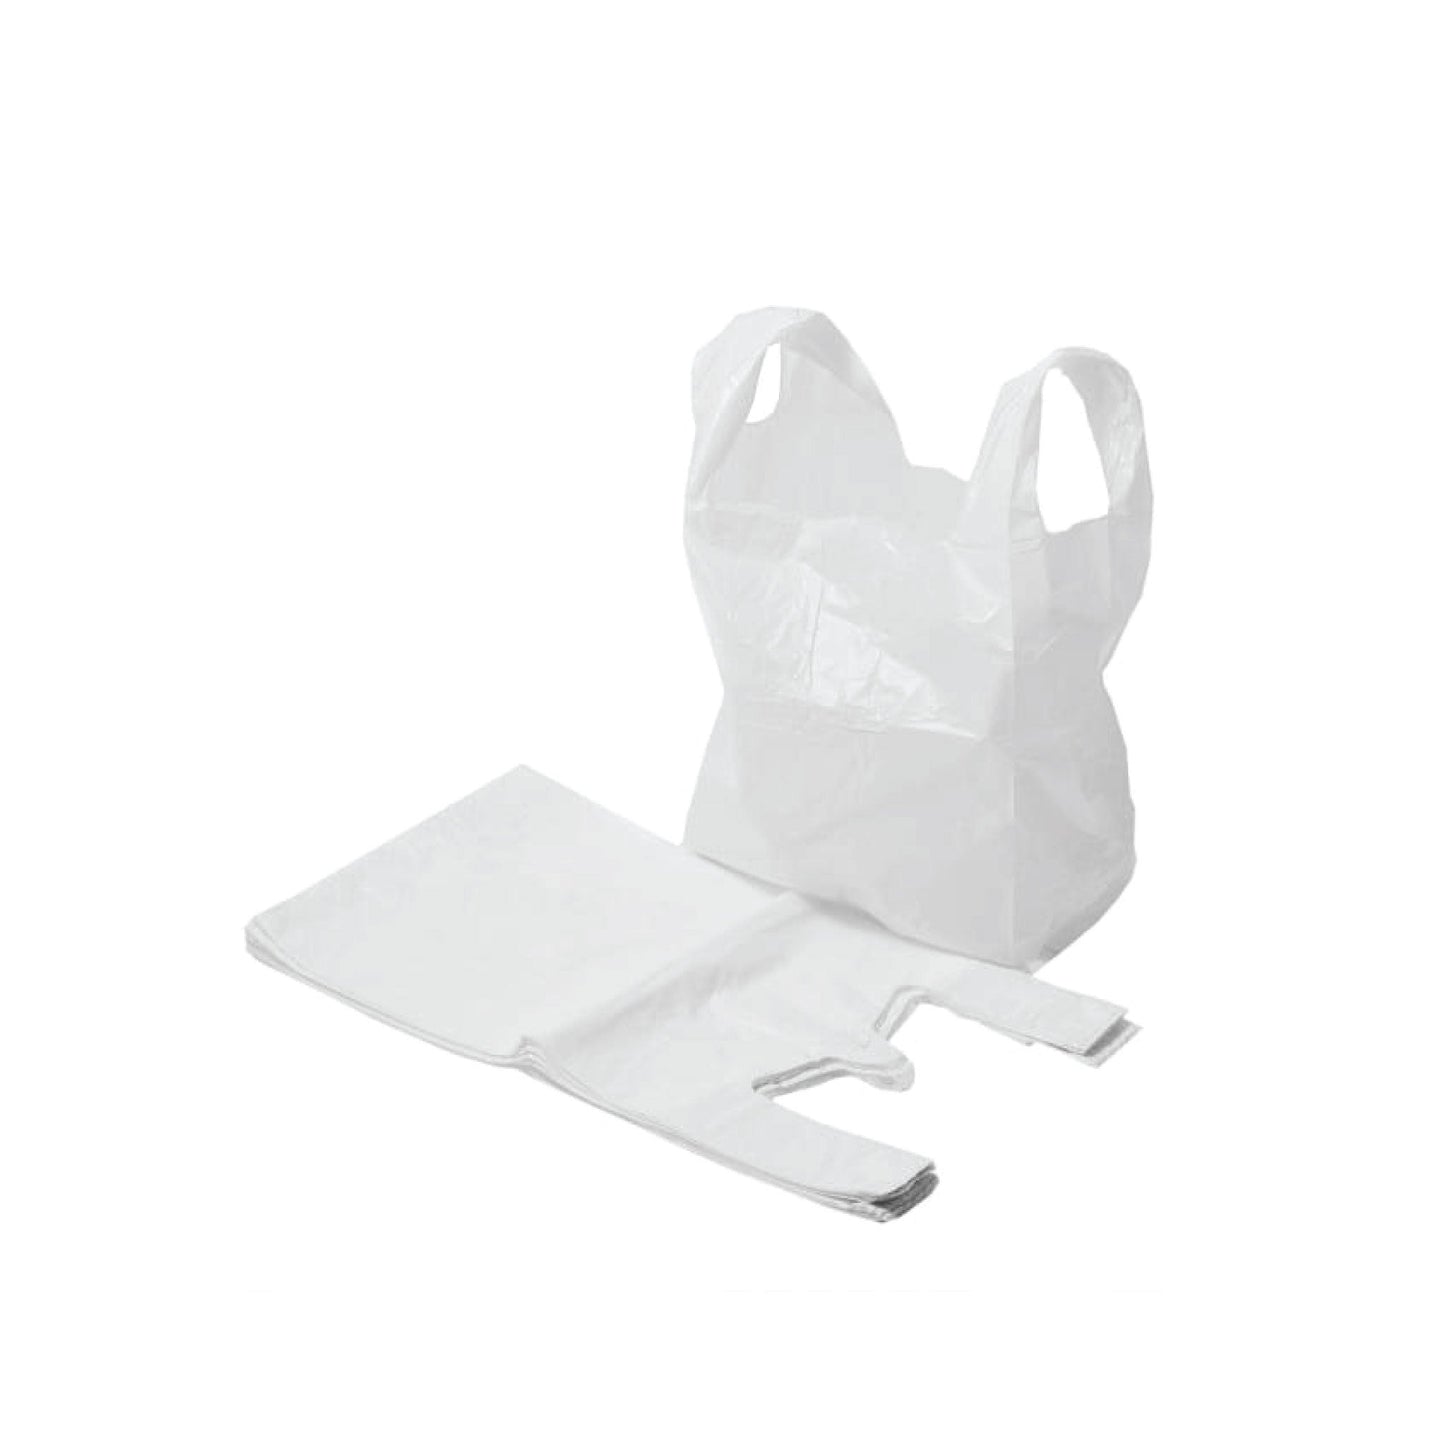 Large White Vest Carriers 11x17x21inch (800 Units)